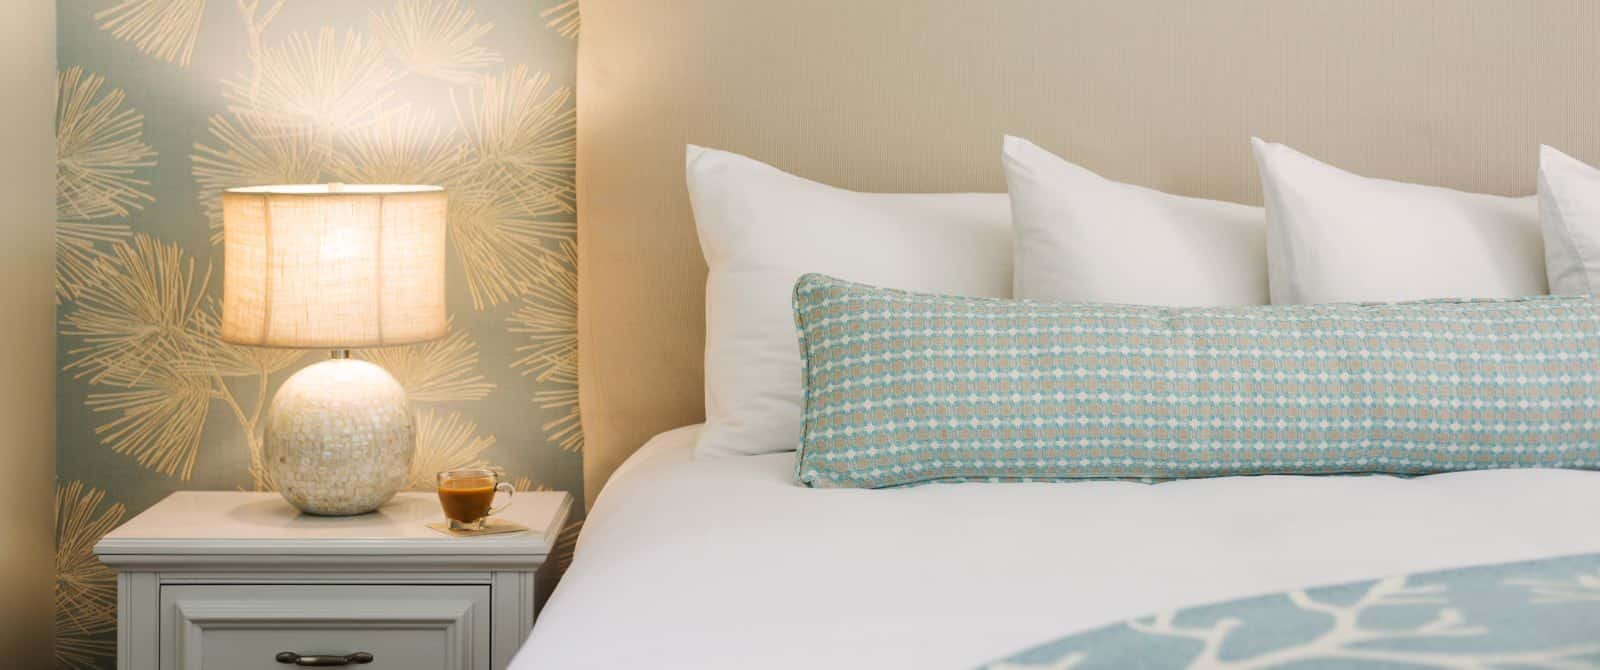 Close up view of bed with light tan upholstered headboard, white bedding, light blue and green patterned long pillow, white side table, and lighted lamp